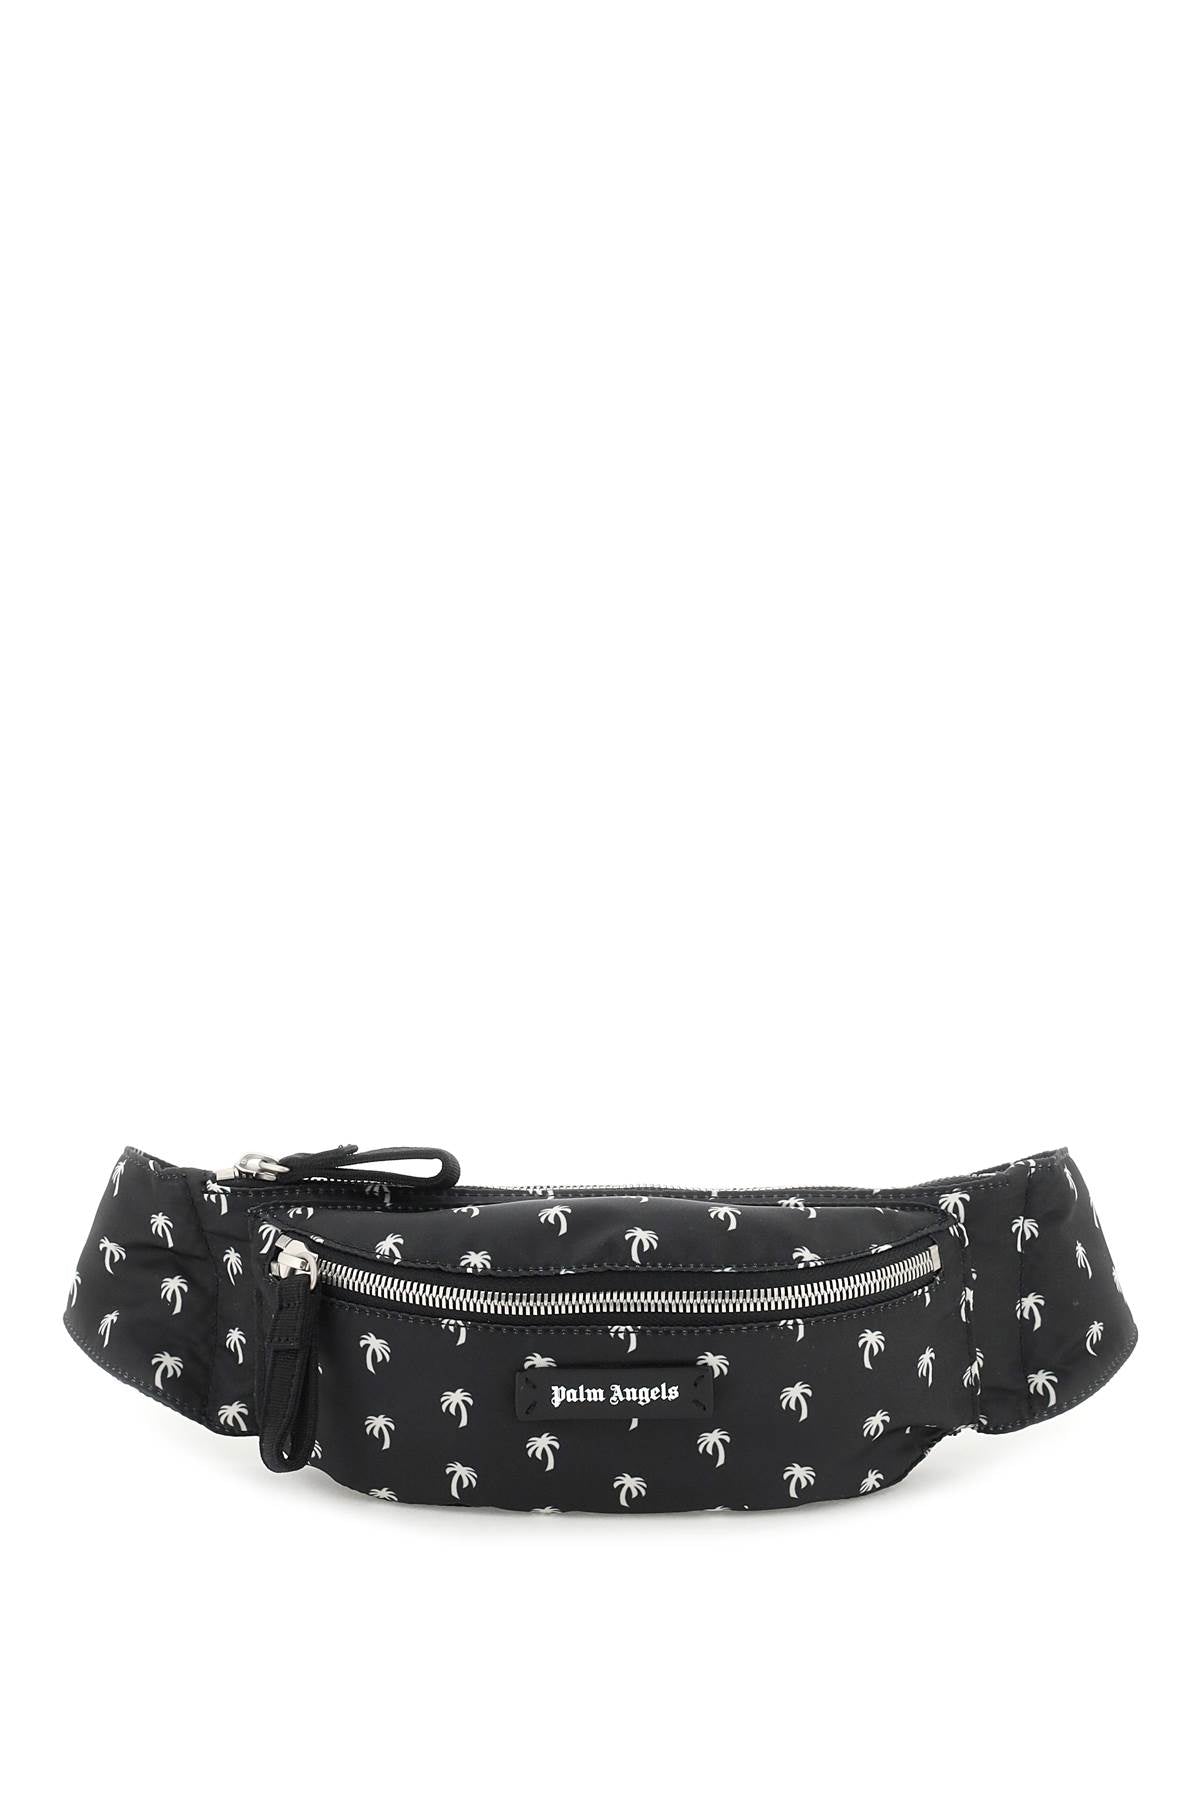 Palm Angels Beltpack With All Over Palms Motif   Nero